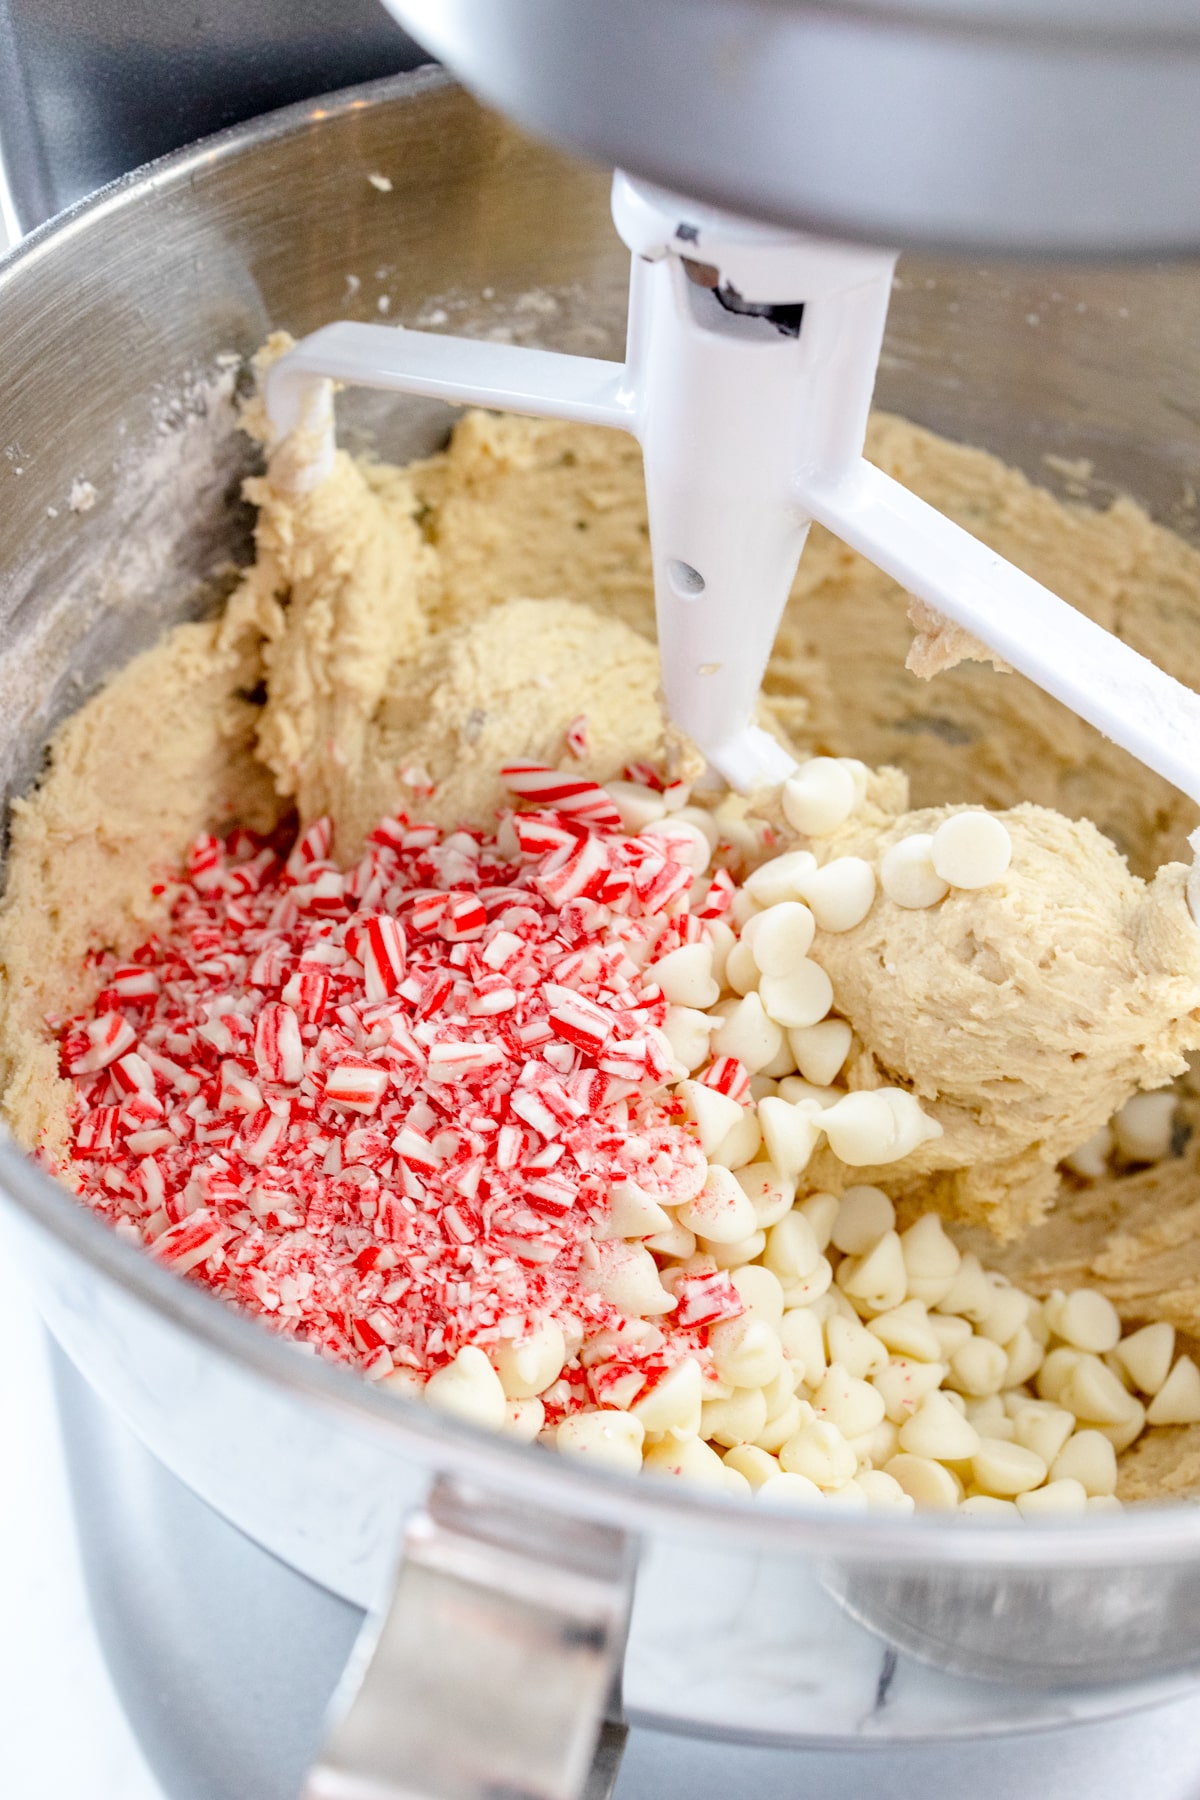 Close up of the bowl of a stand mixer with cookie dough in it with chocolate chips and crushed candy canes that have been added on top to mix in.